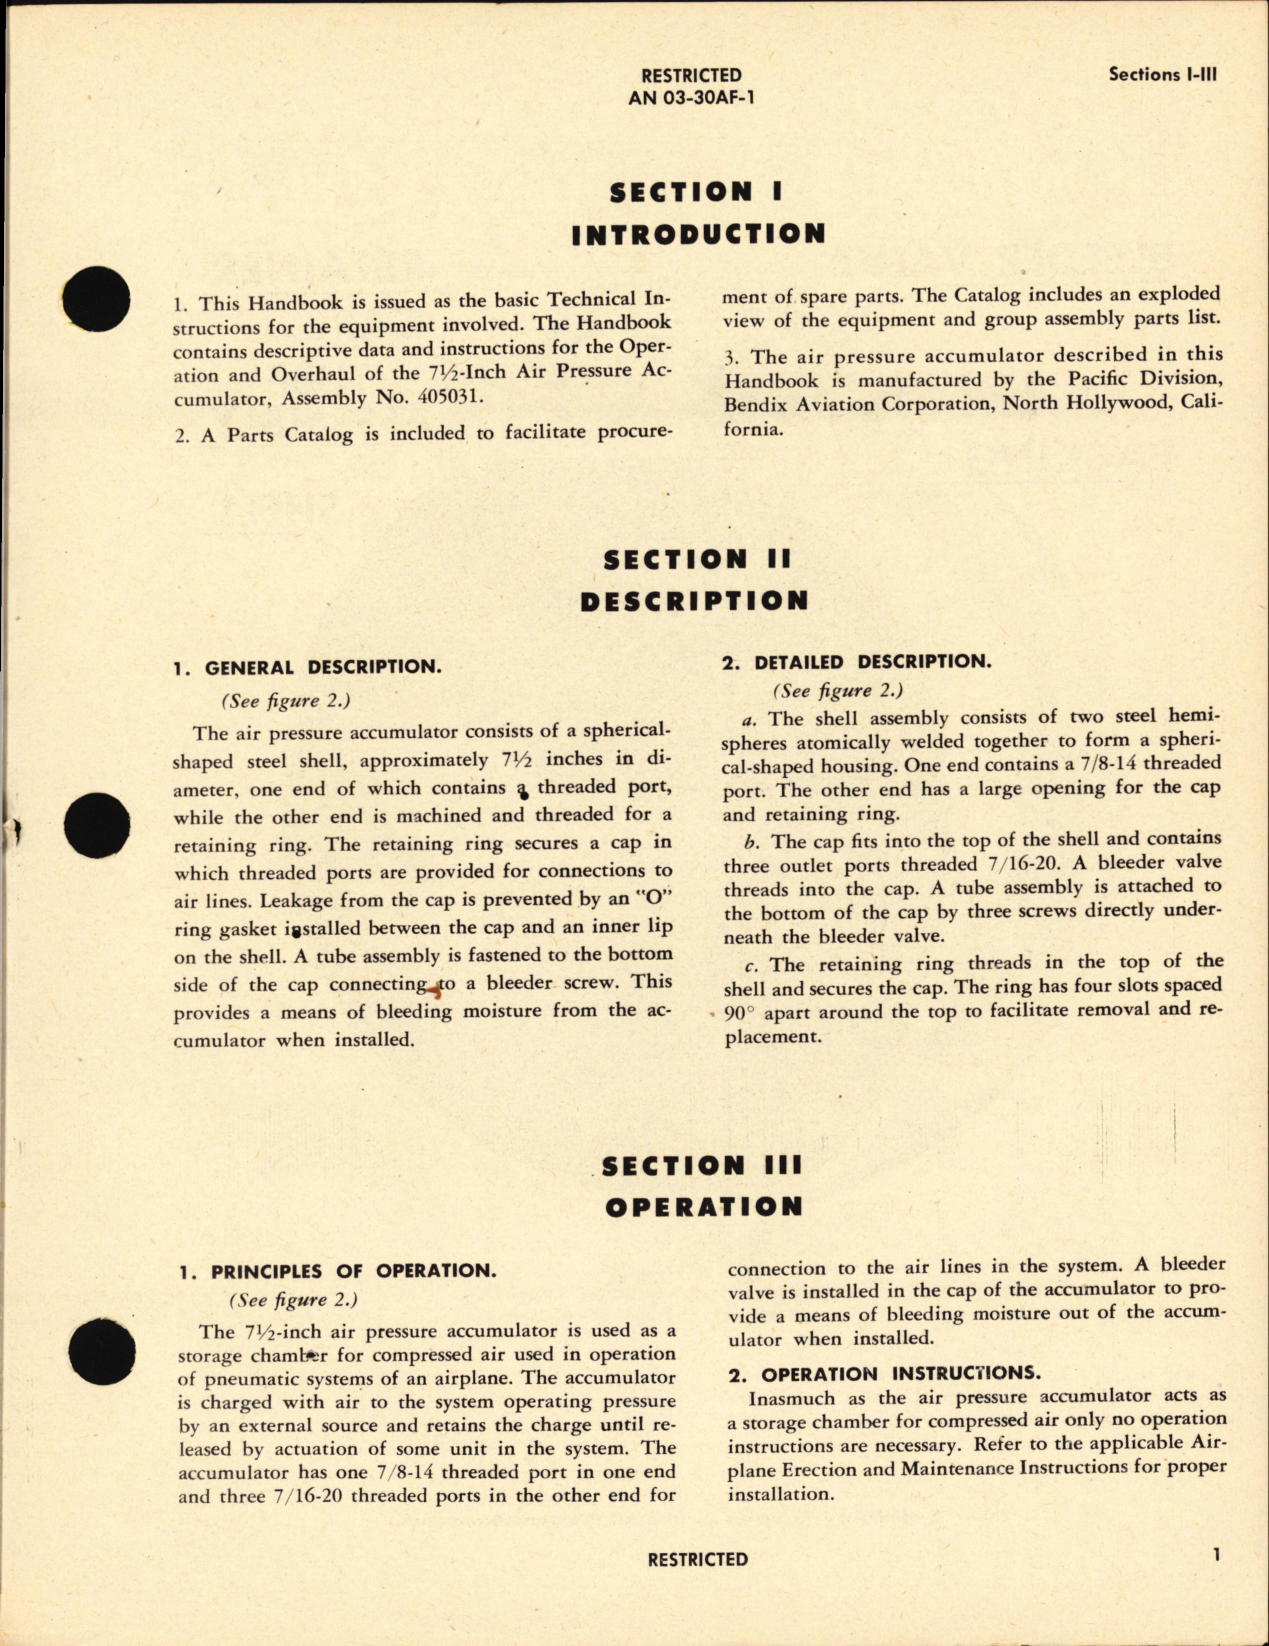 Sample page 5 from AirCorps Library document: Handbook of Overhaul Instructions with Parts Catalog for Air Pressure Accumulator NO. 405031